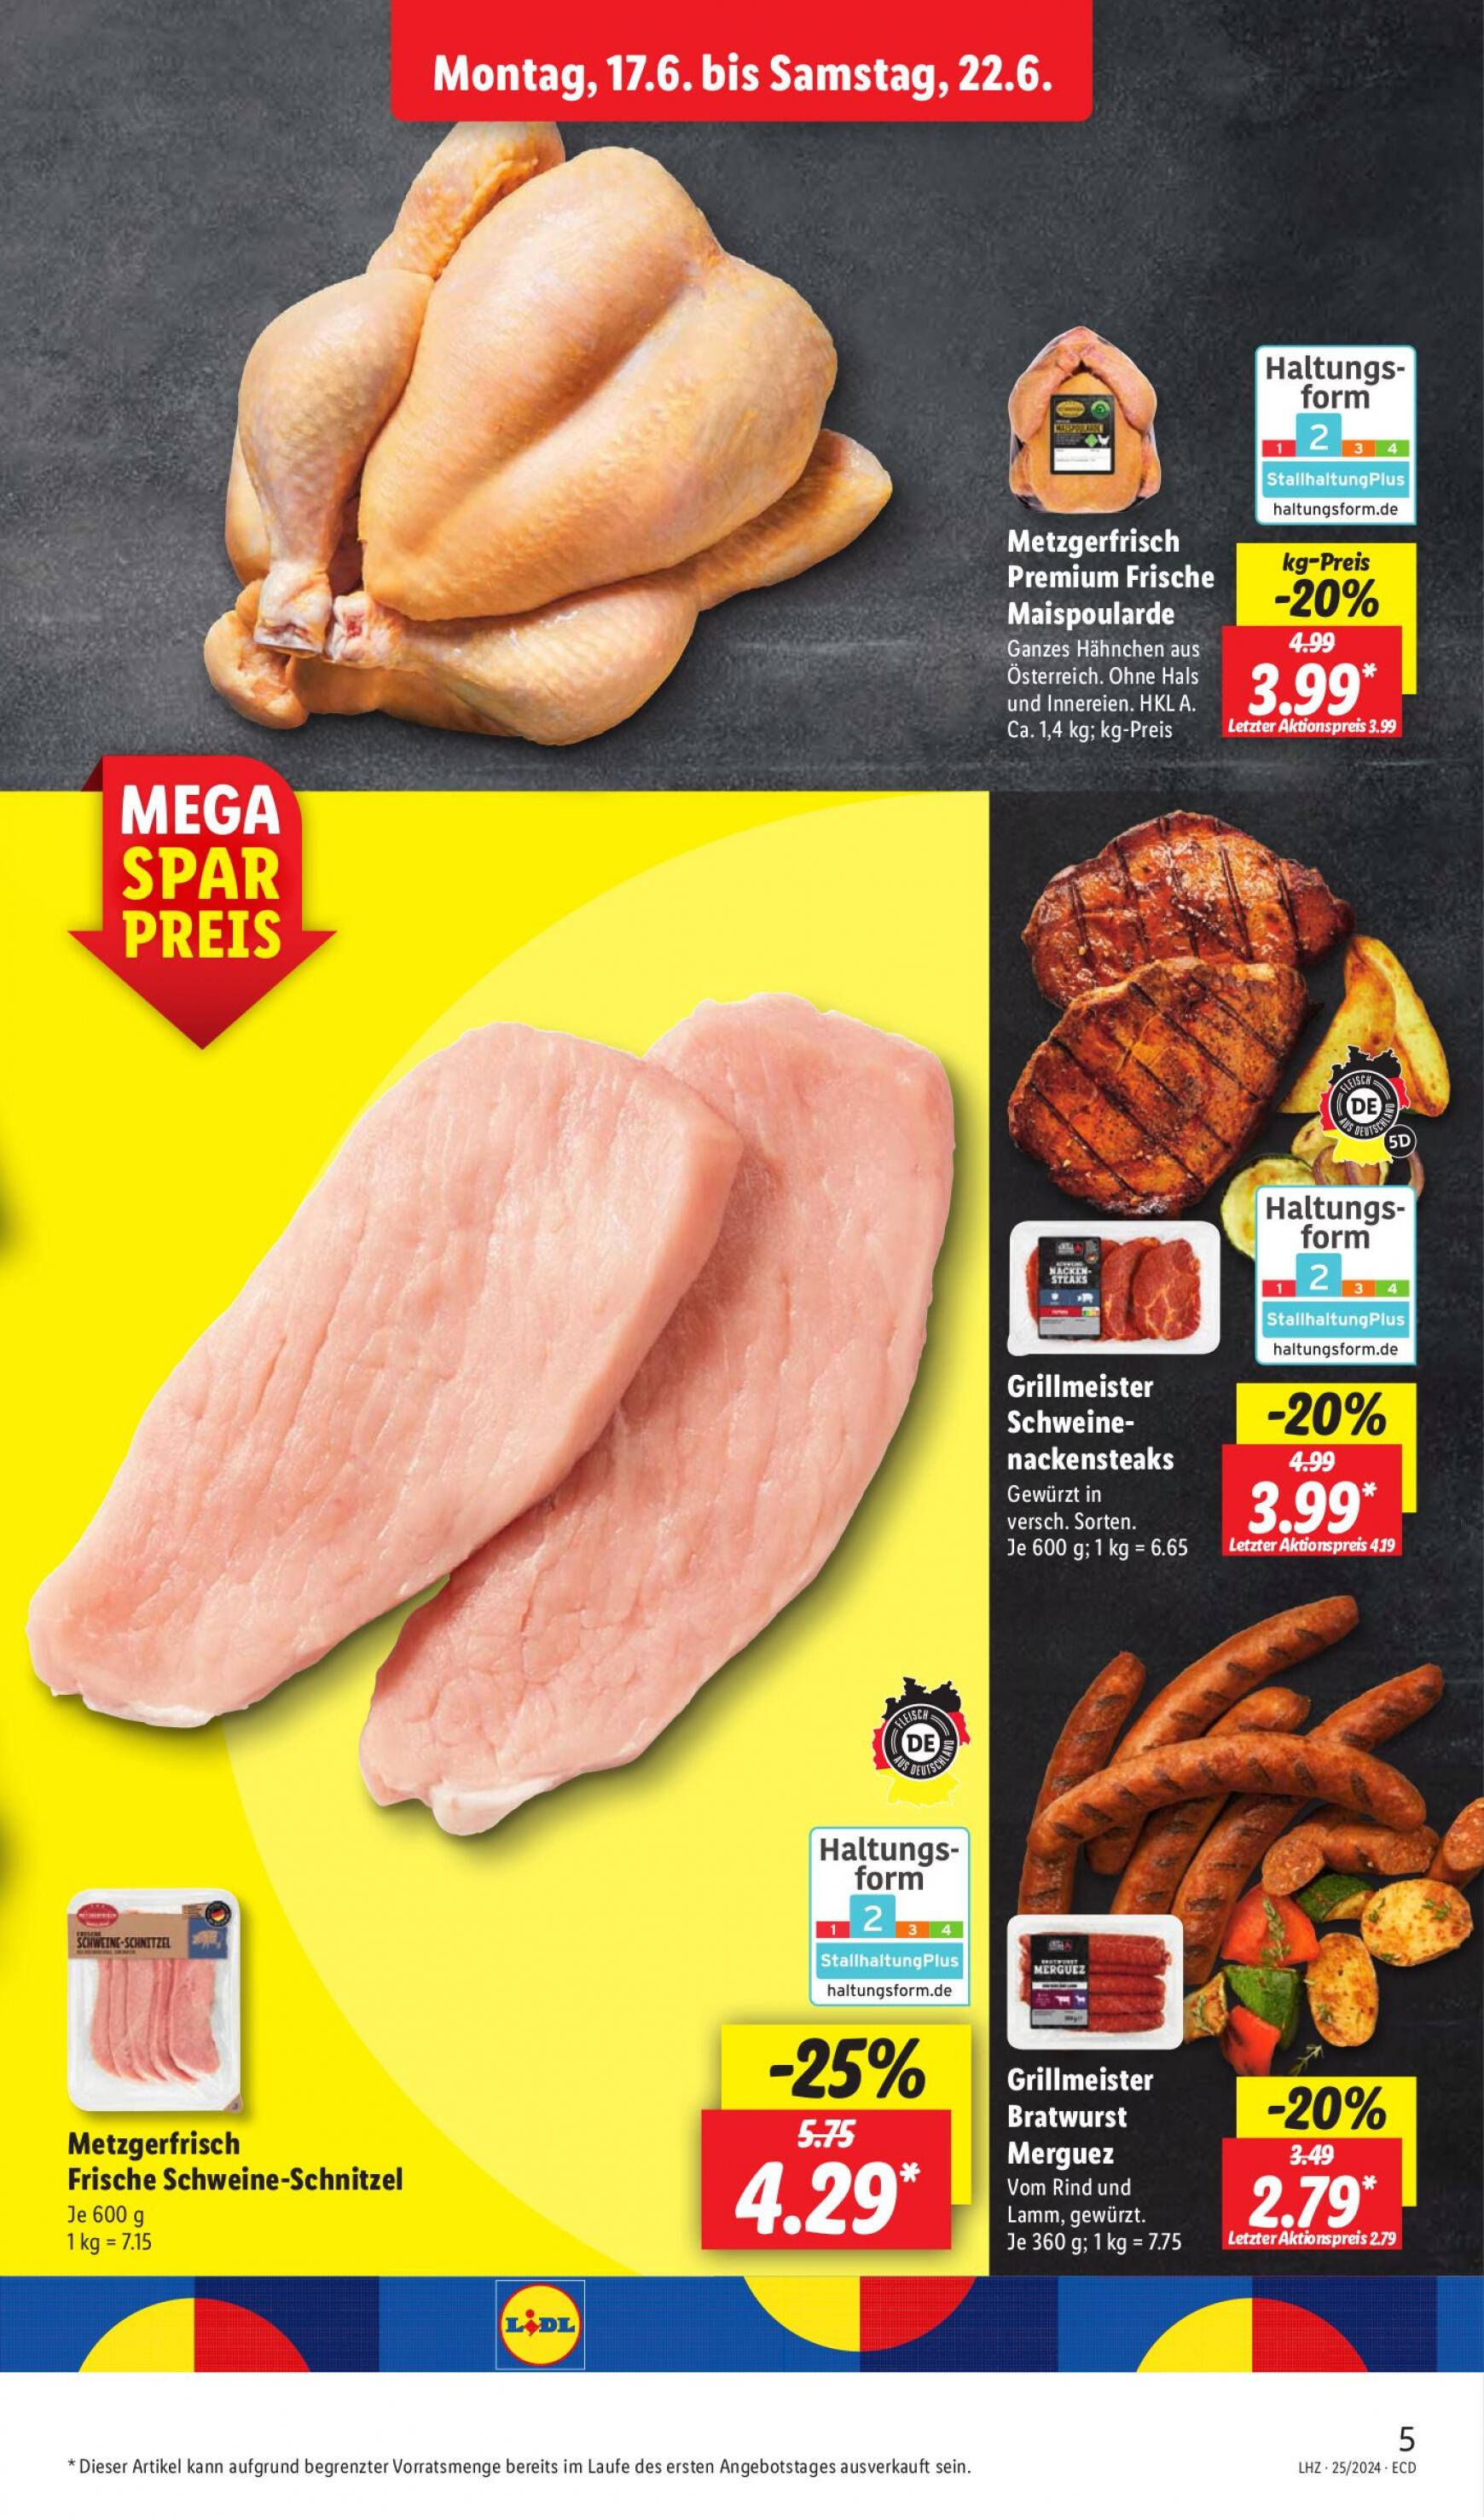 lidl - Flyer Lidl aktuell 17.06. - 22.06. - page: 7